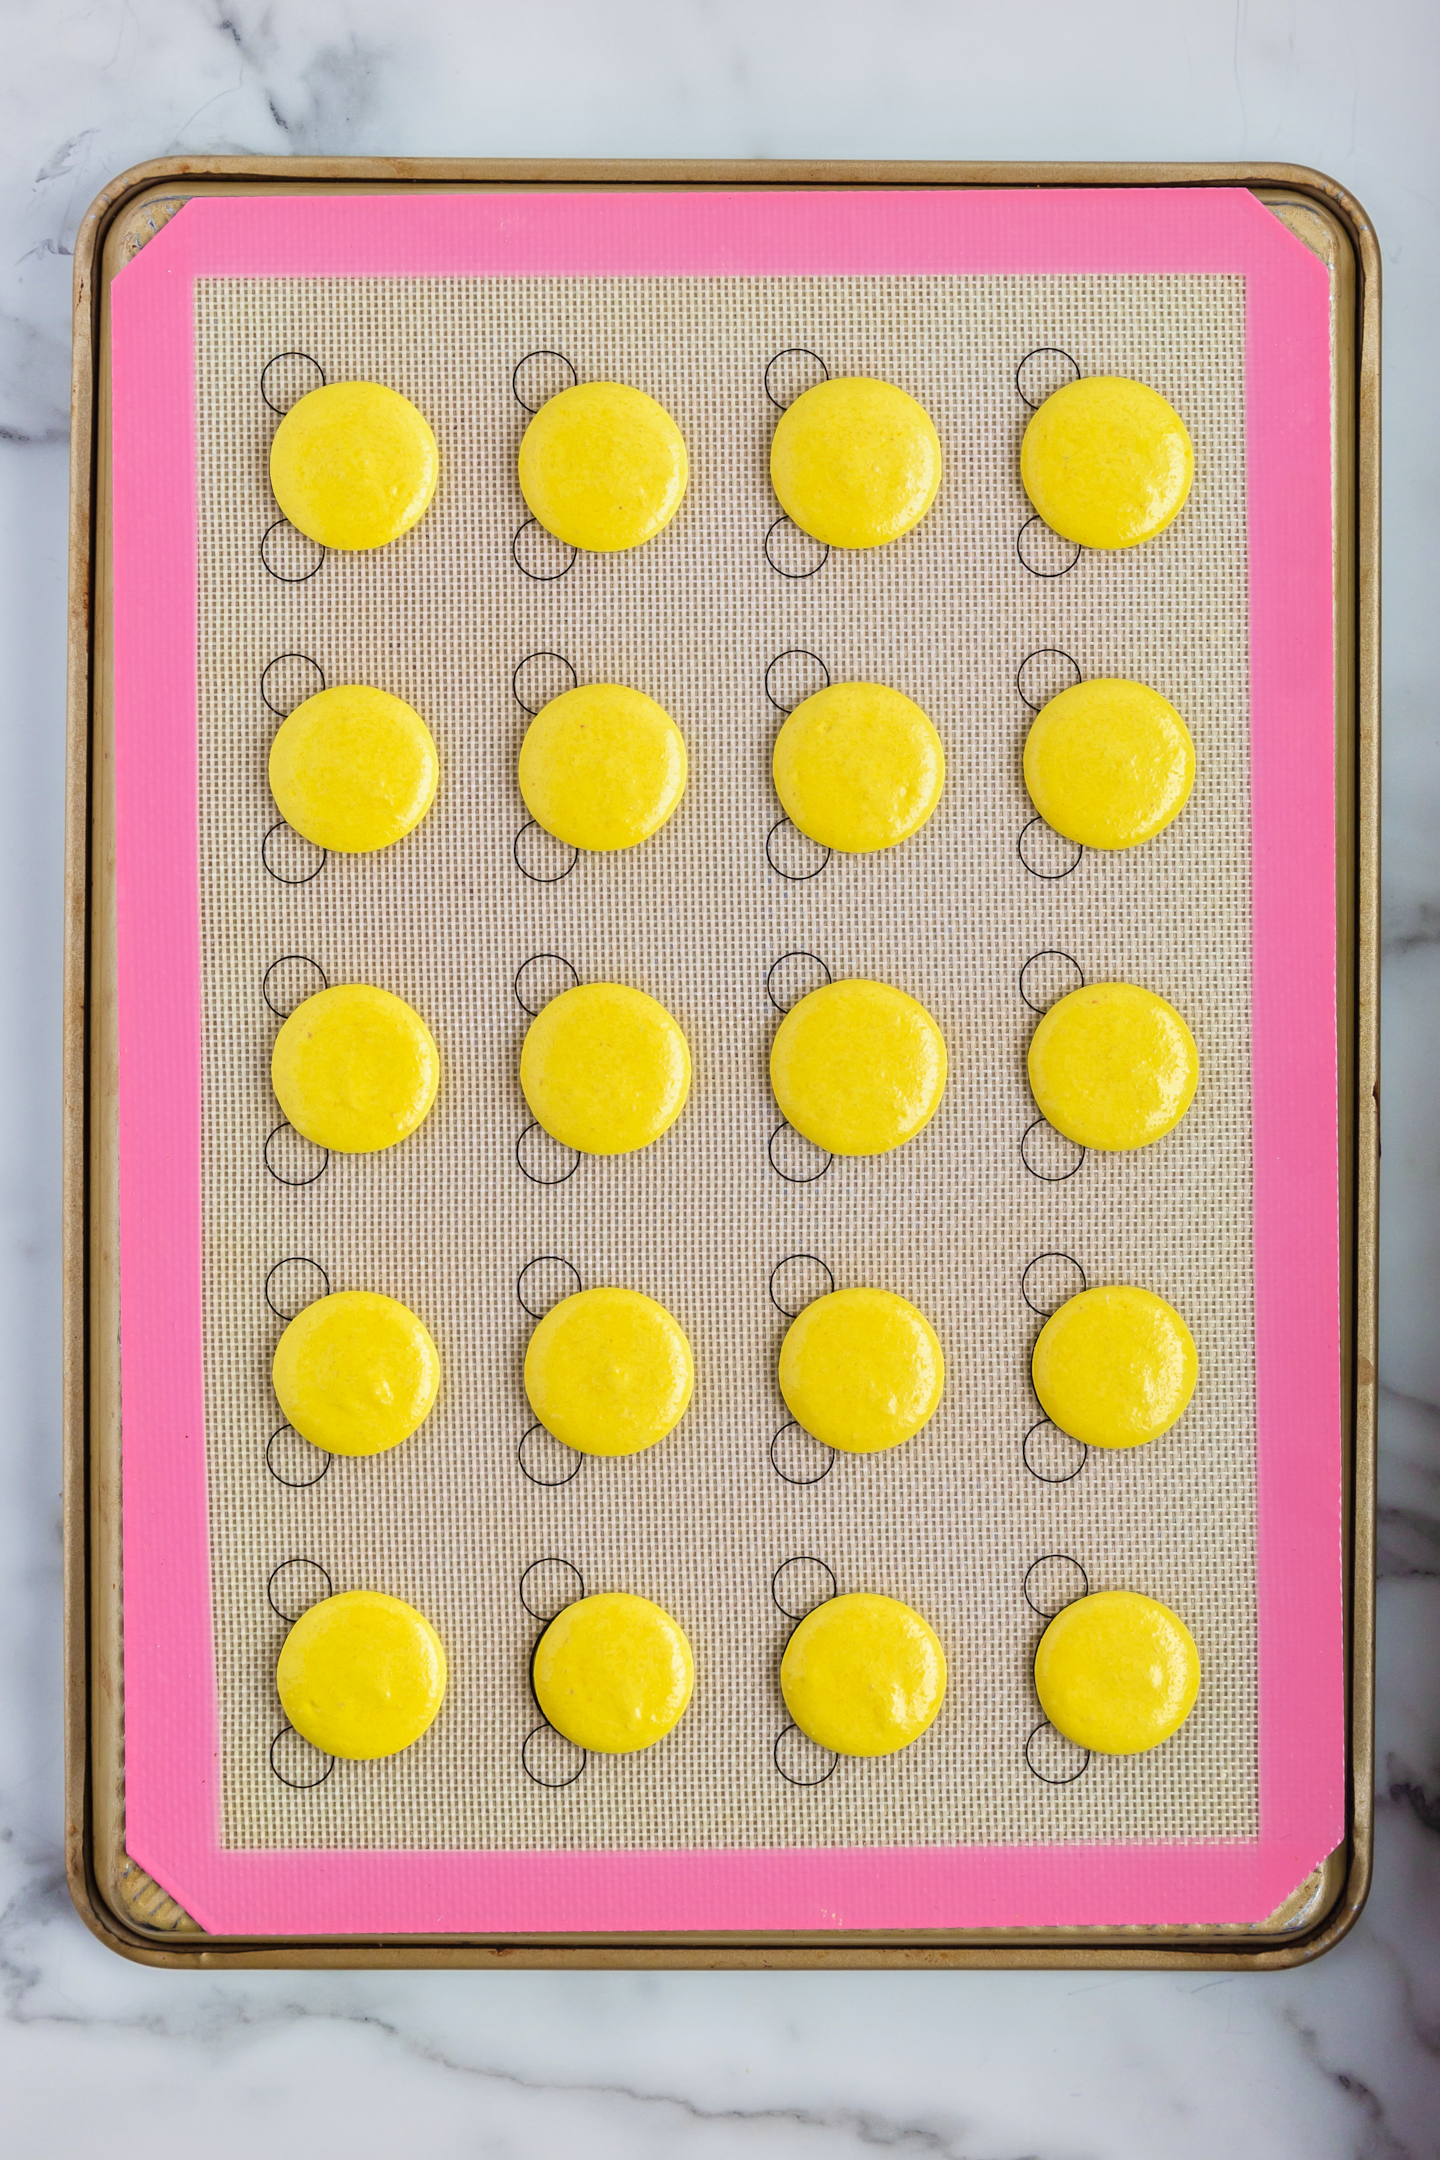 piped macaron shells on a silicone baking mat